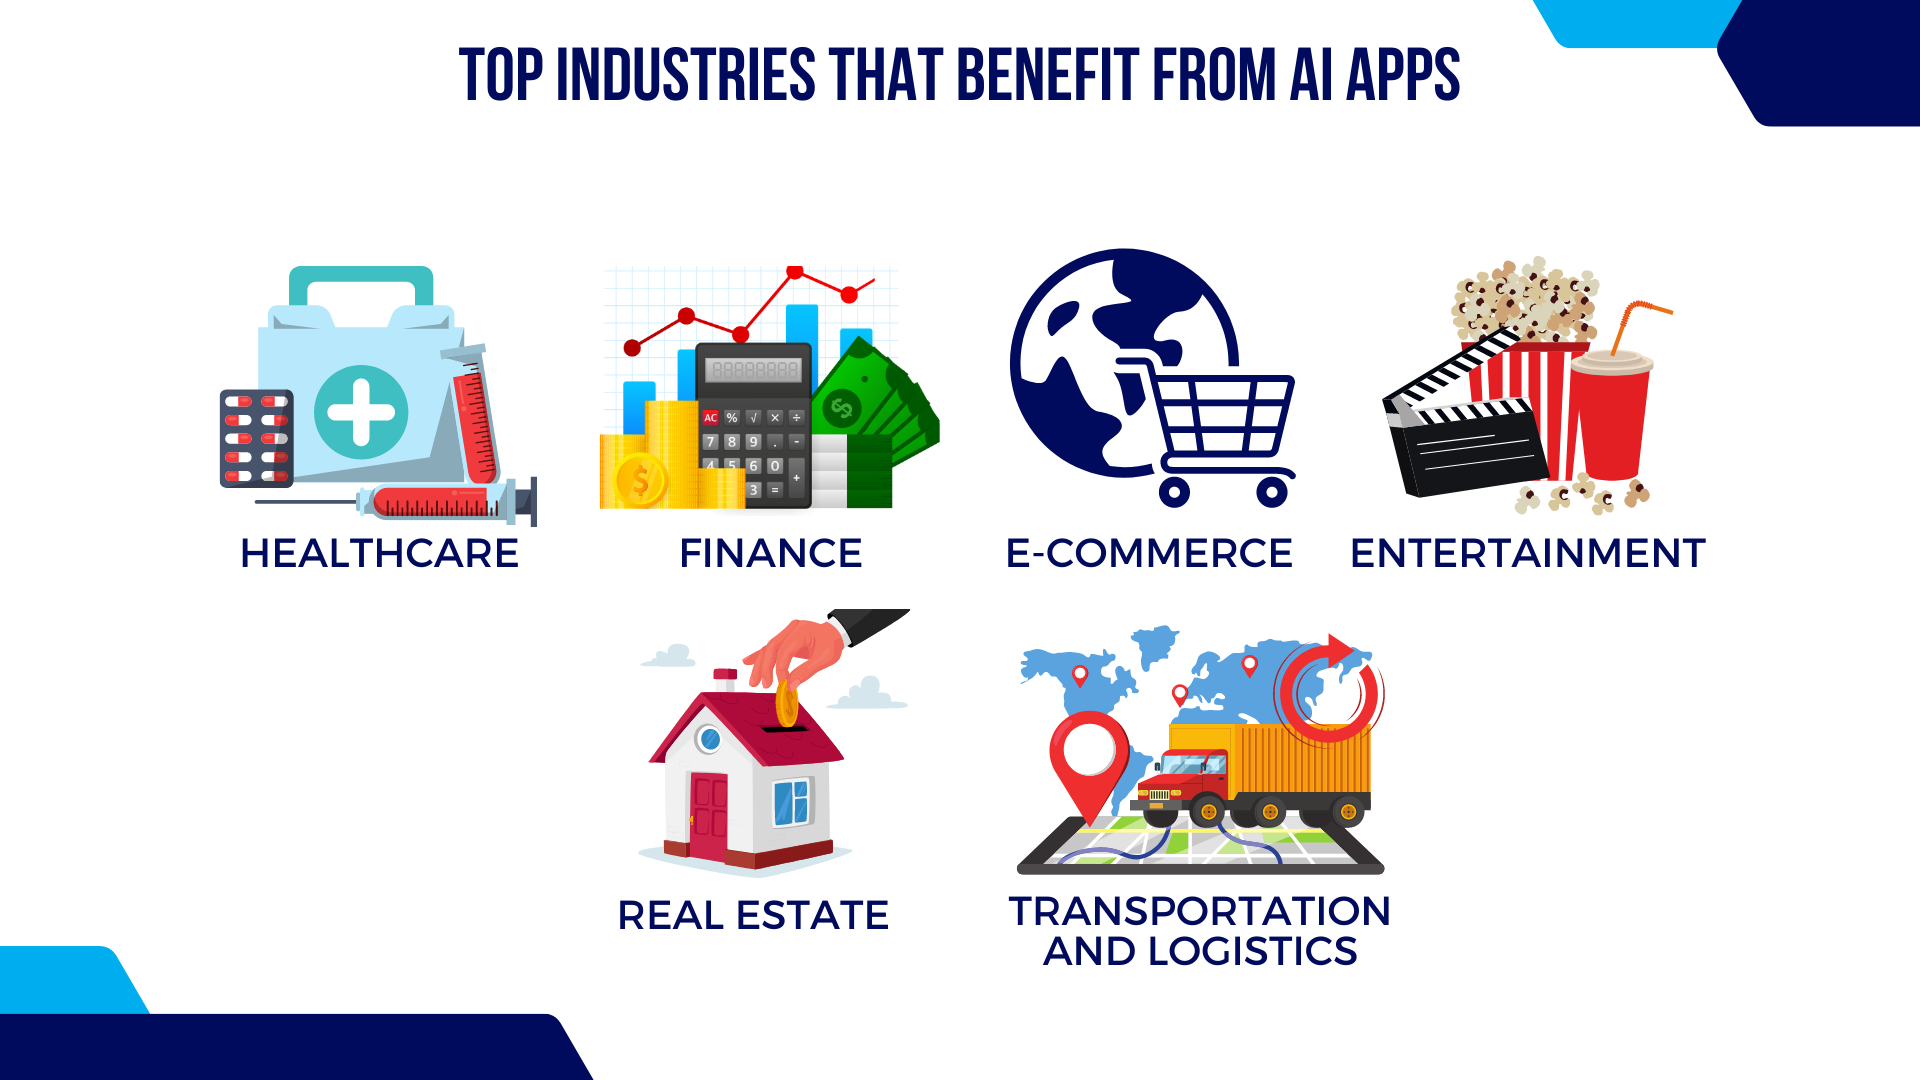 Top Industries that Benefit from AI Apps